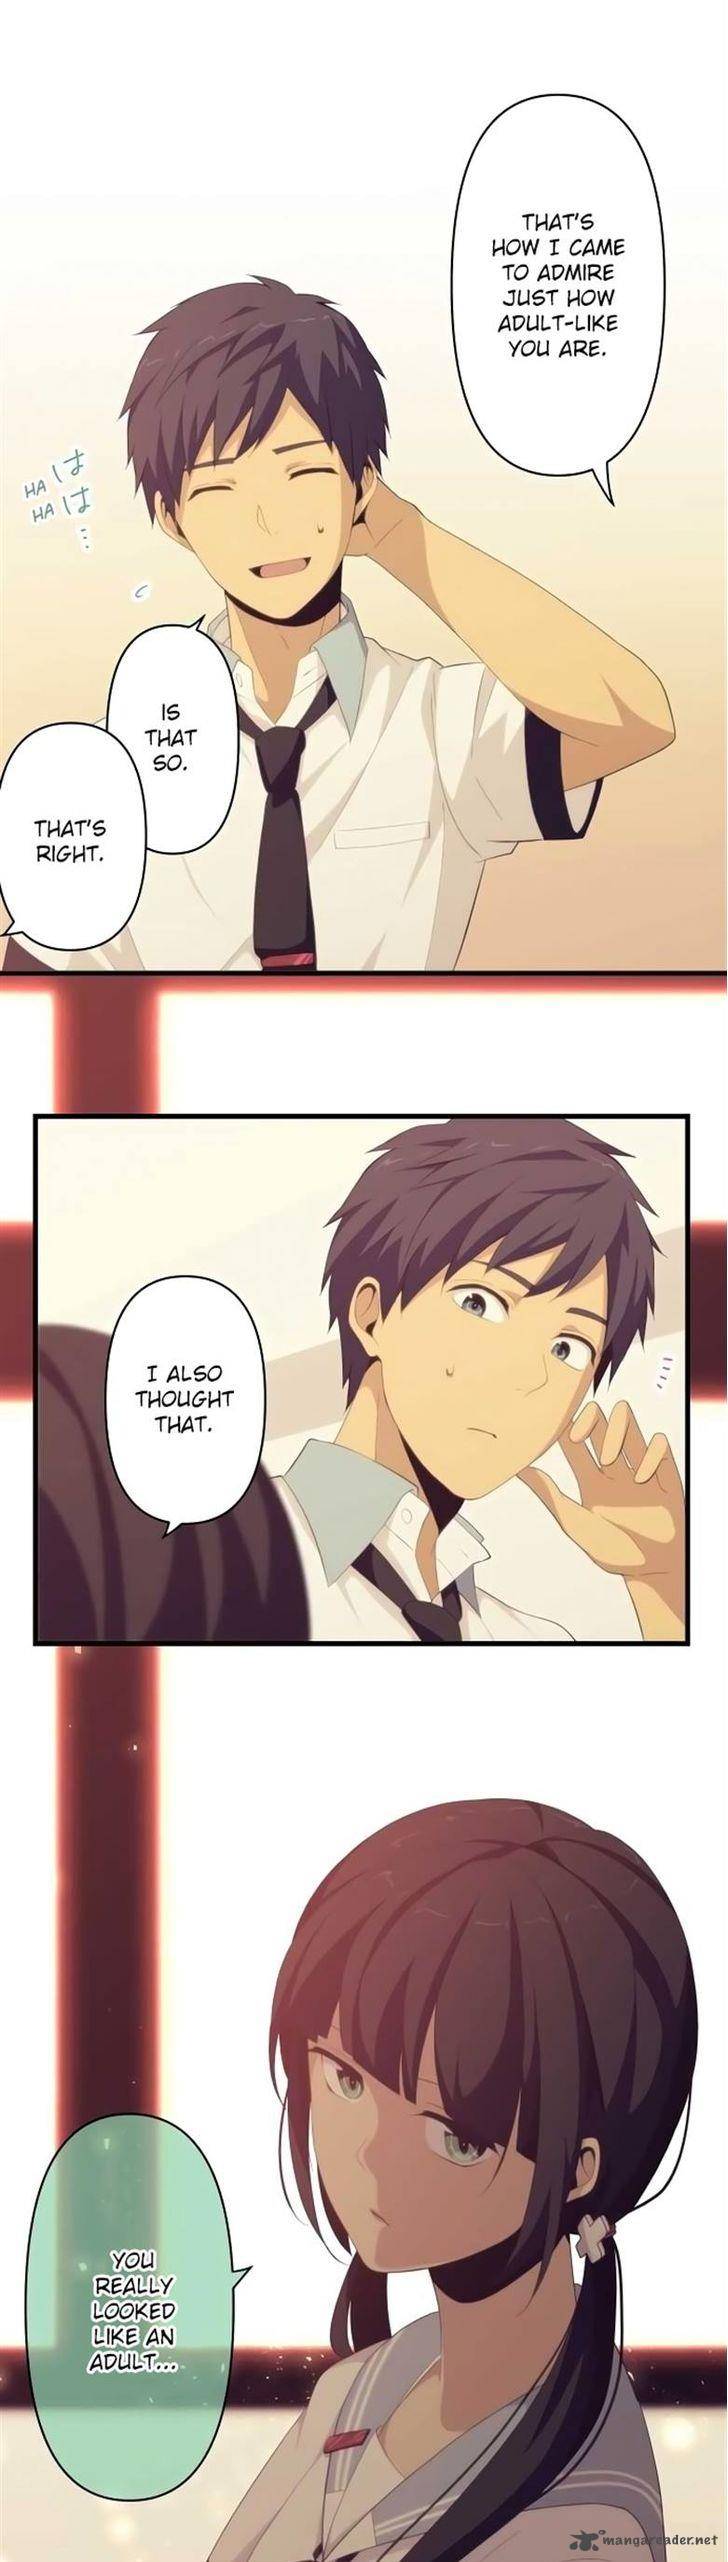 Relife Chapter 130 Page 5